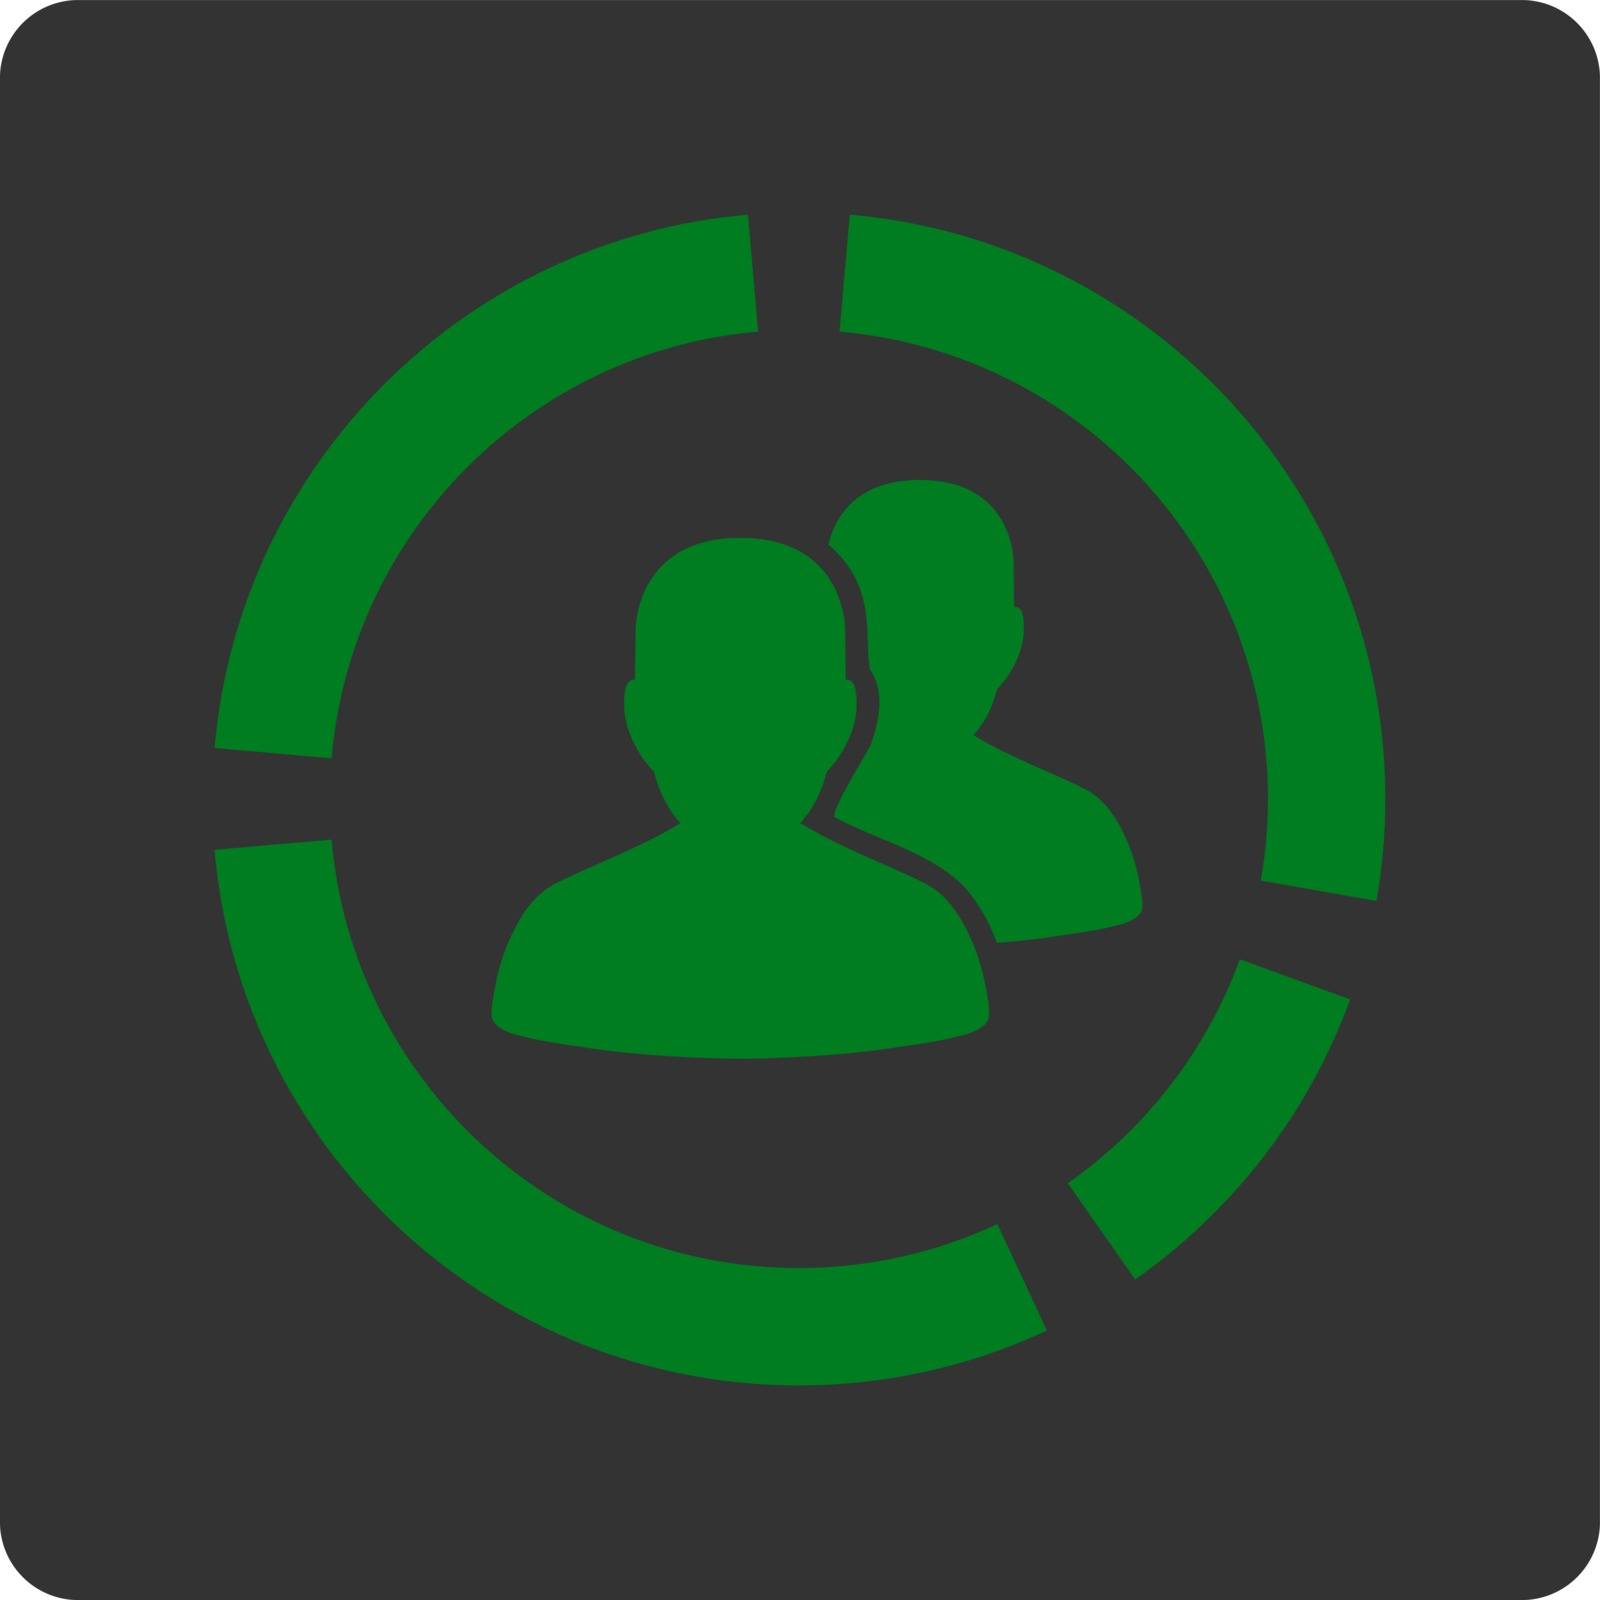 Demography Diagram vector icon. This flat rounded square button uses green and gray colors and isolated on a white background.